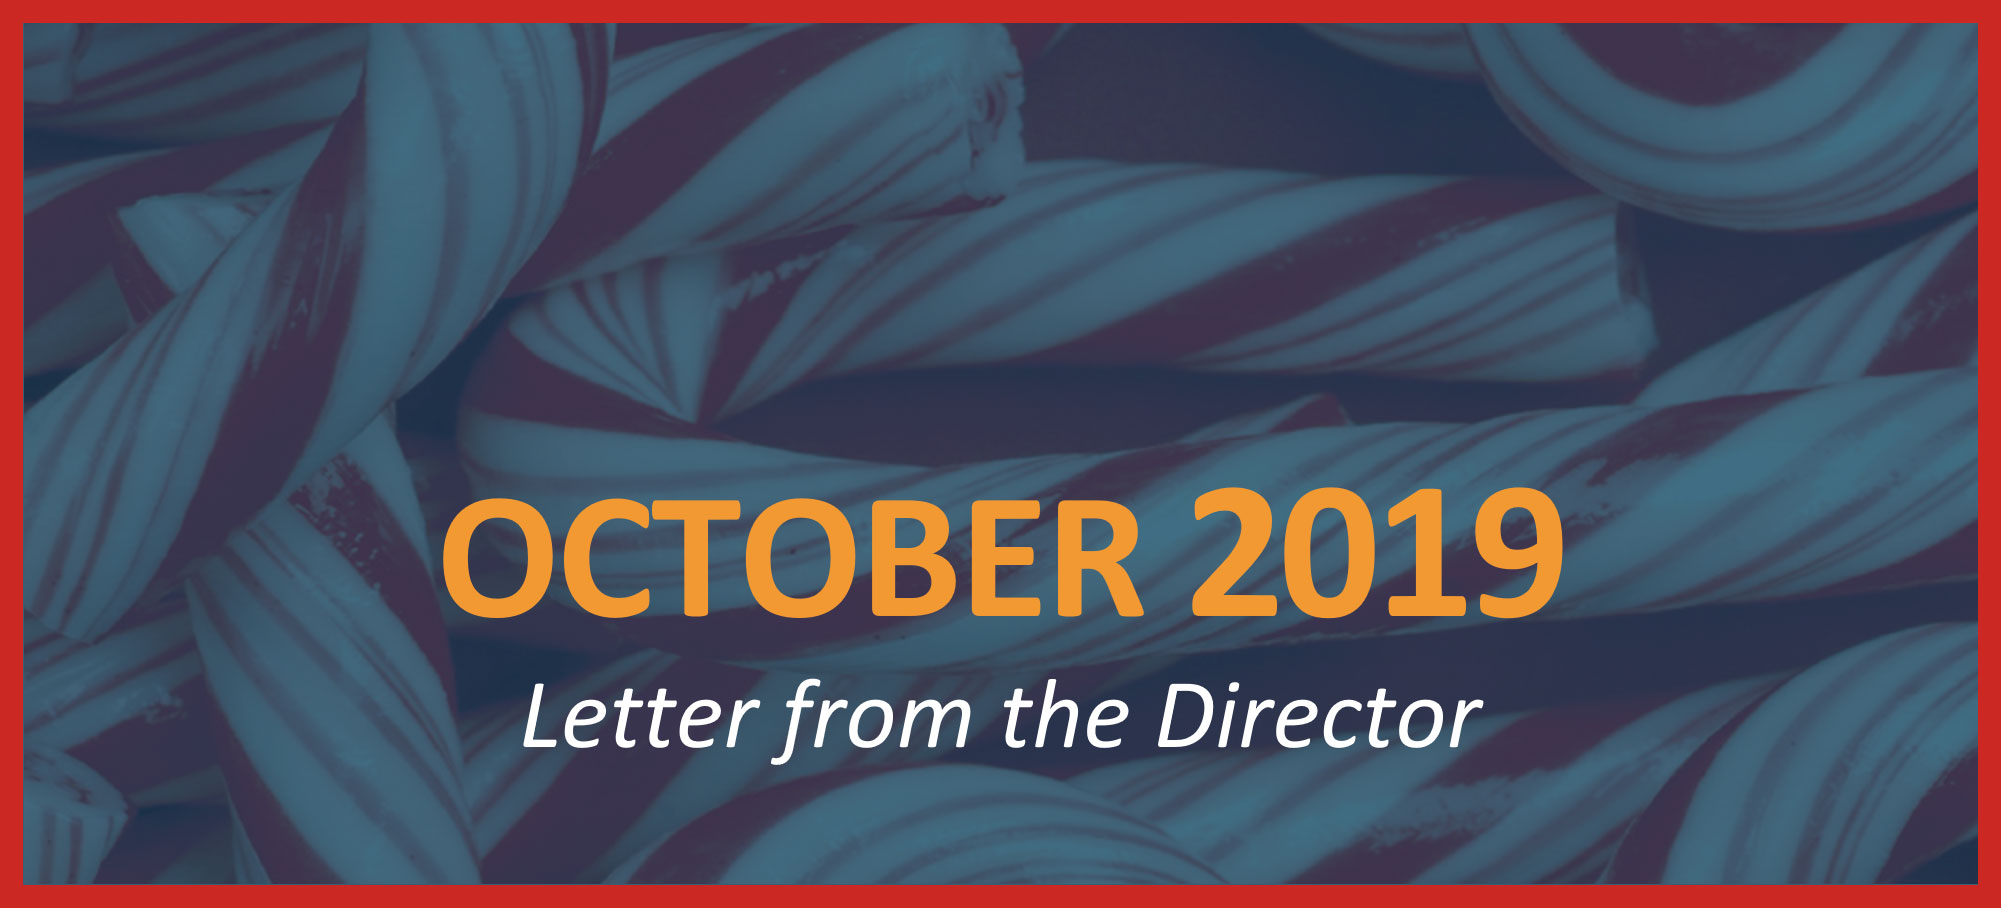 October 2019 - Letter from the Director